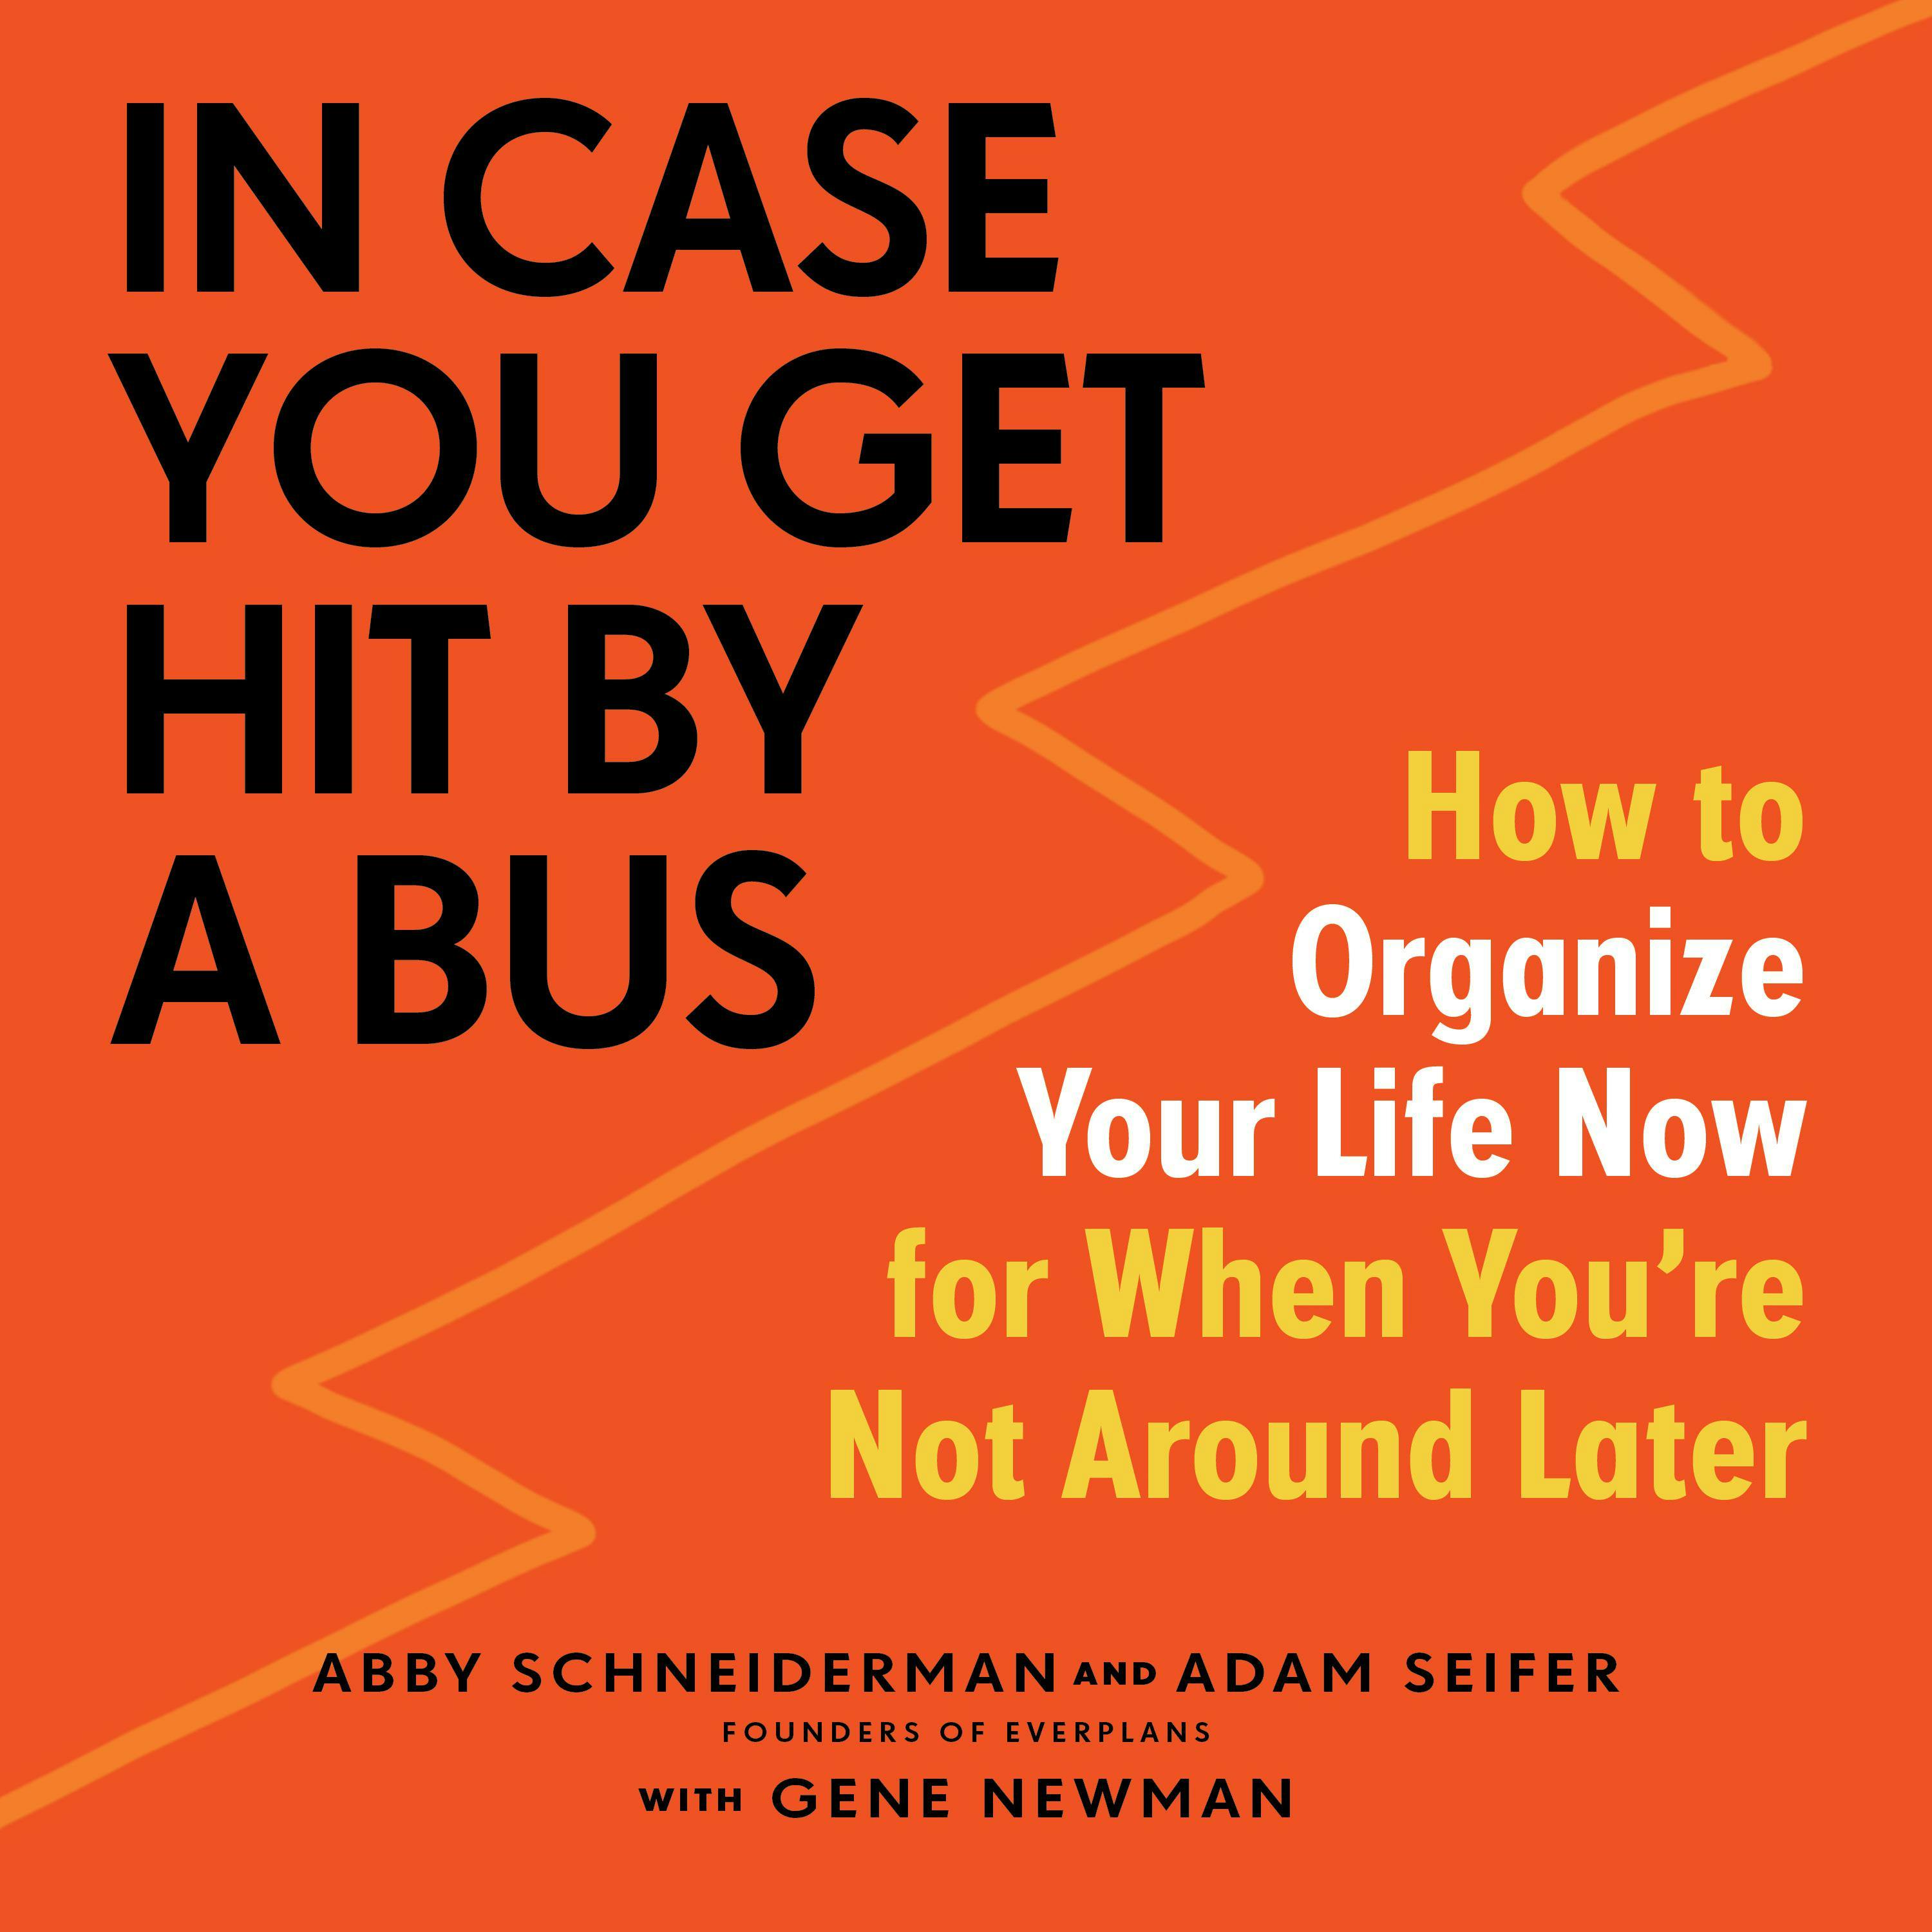 In Case You Get Hit by a Bus: A Plan to Organize Your Life Now for When You're Not Around Later - Adam Seifer, Abby Schneiderman, Gene Newman